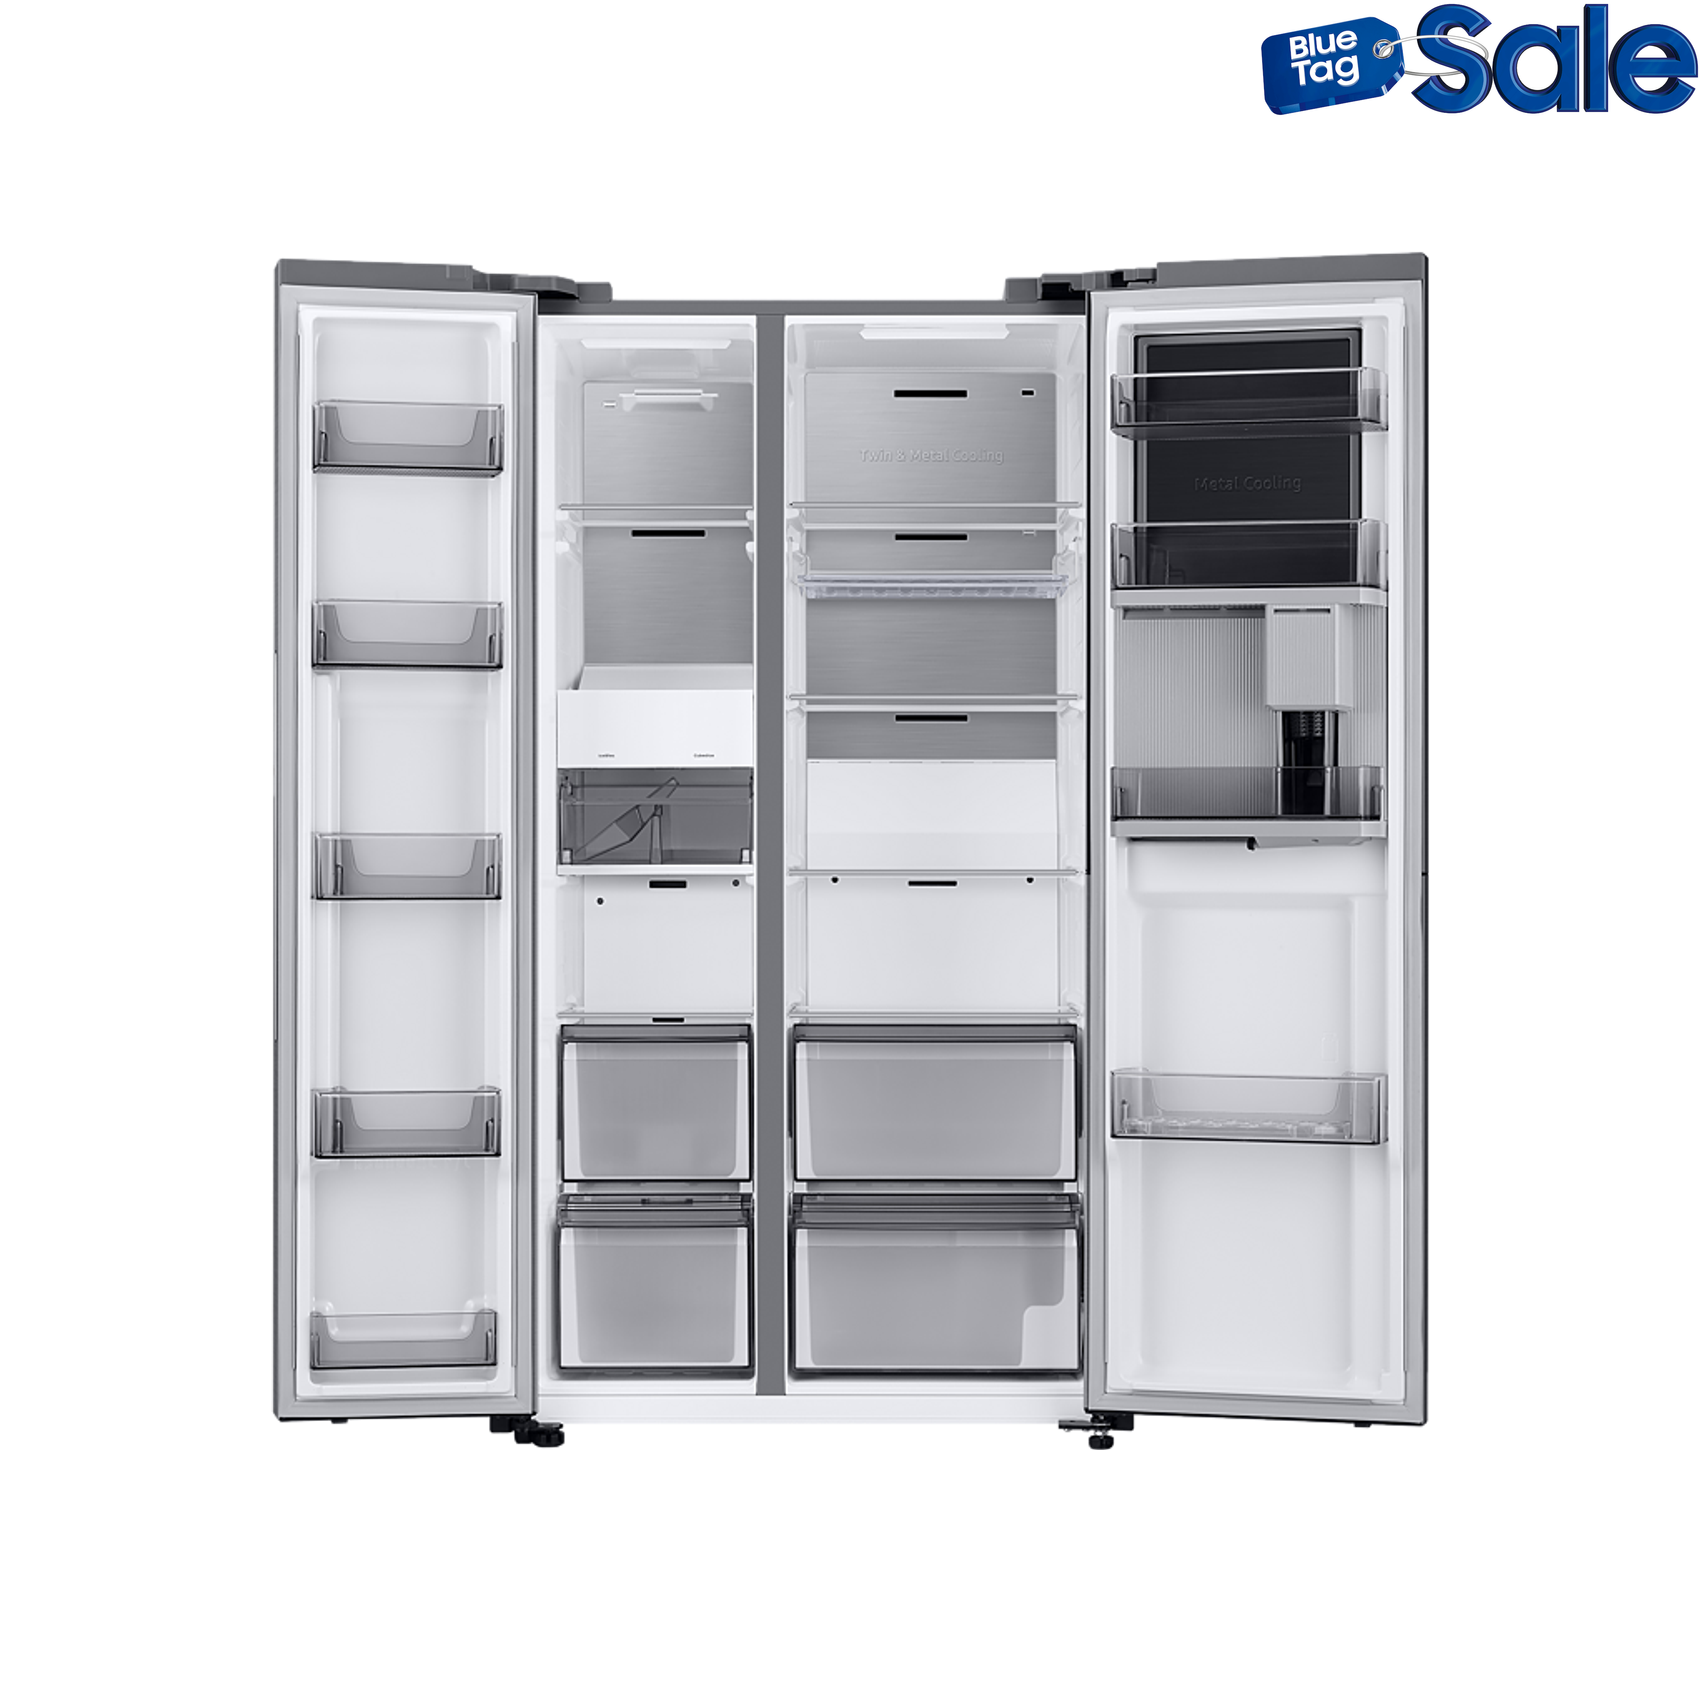 Samsung 595L Nett Food Showcase Side by Side Fridge with Beverage Centre™ - Clean Steel Finish (Photo: 7)